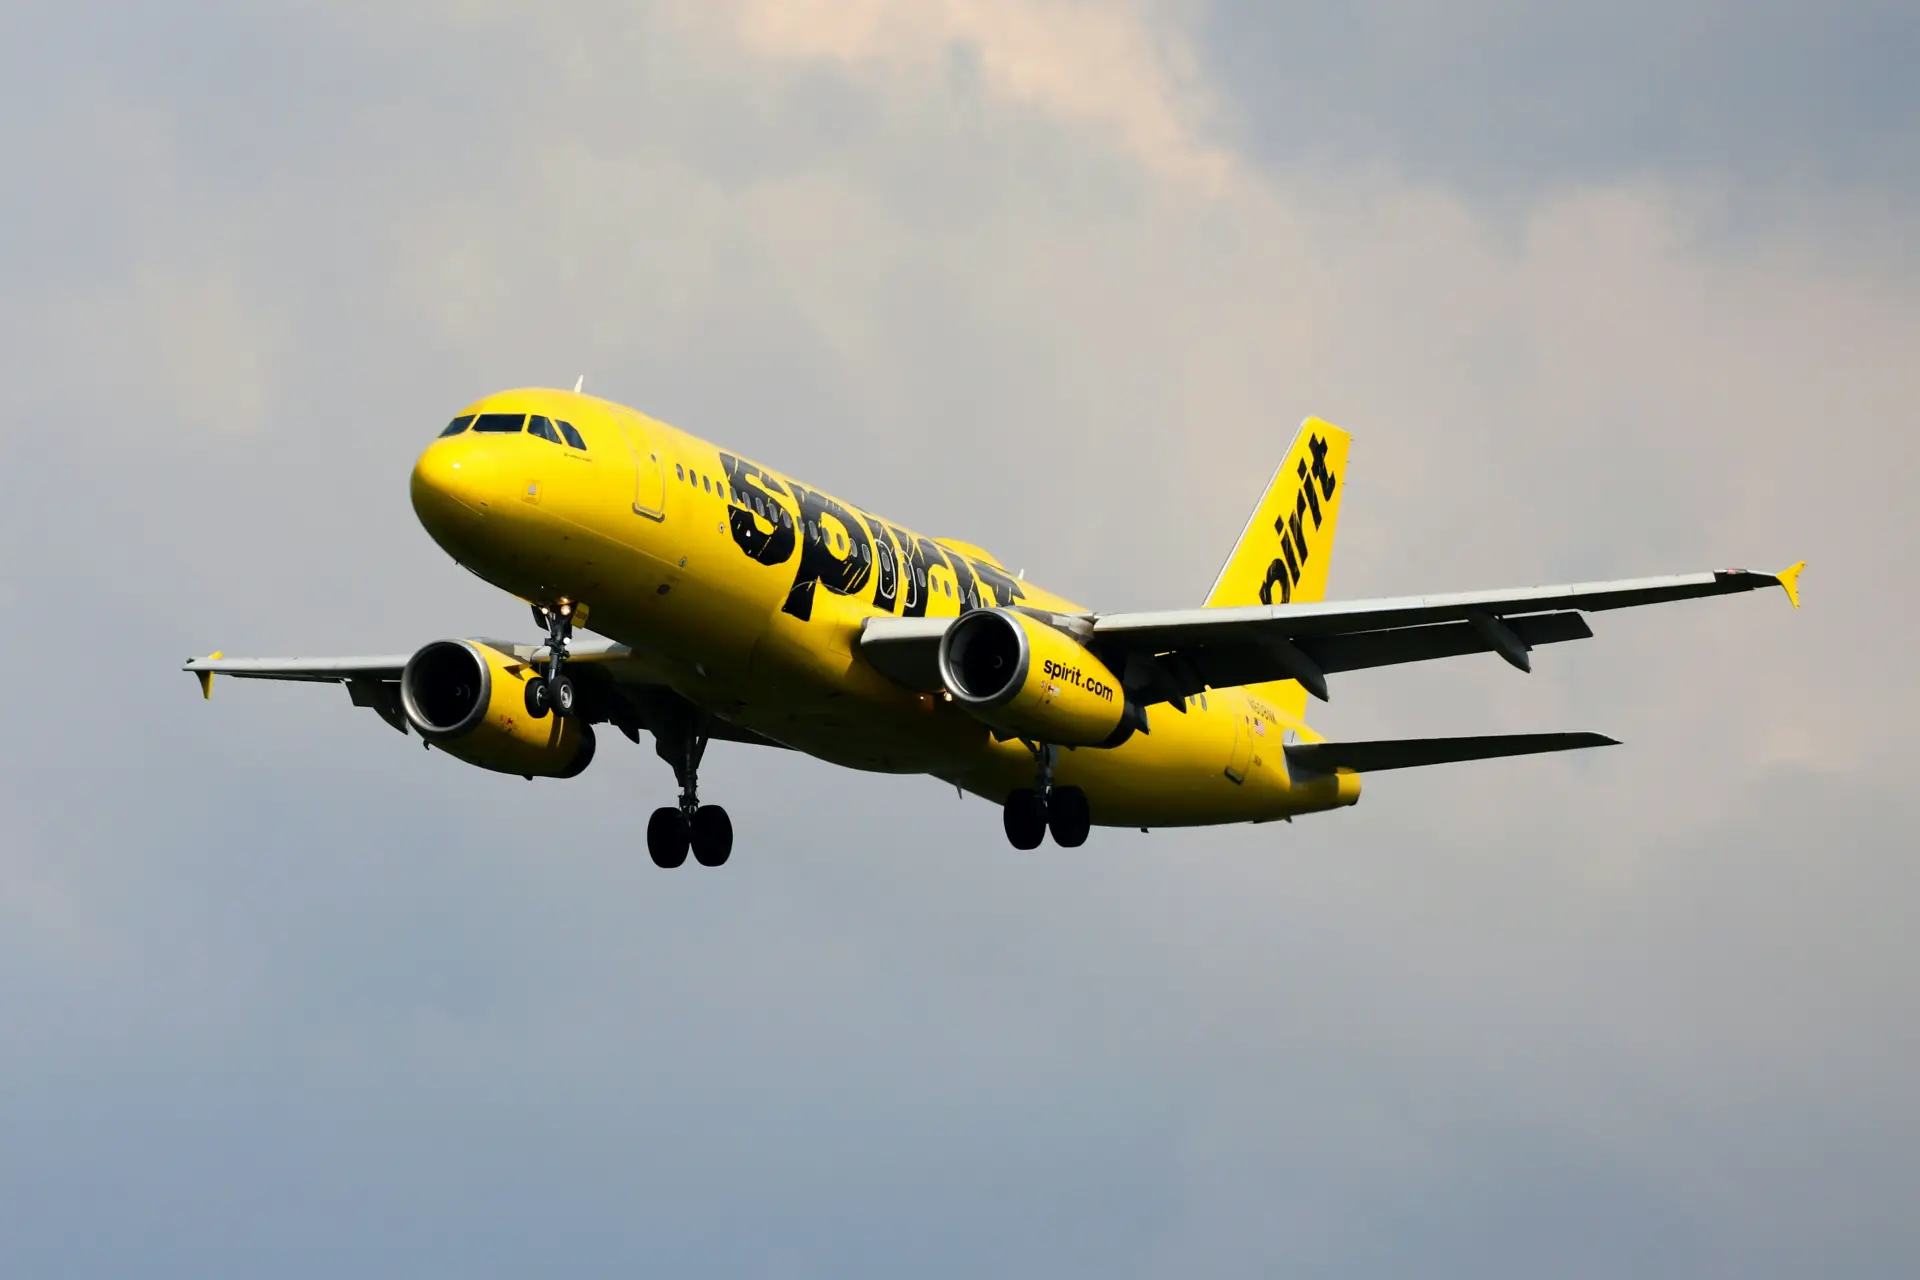 Navigating the Friendly Skies: Spirit Airlines Abolishes Change and Cancellation Fees